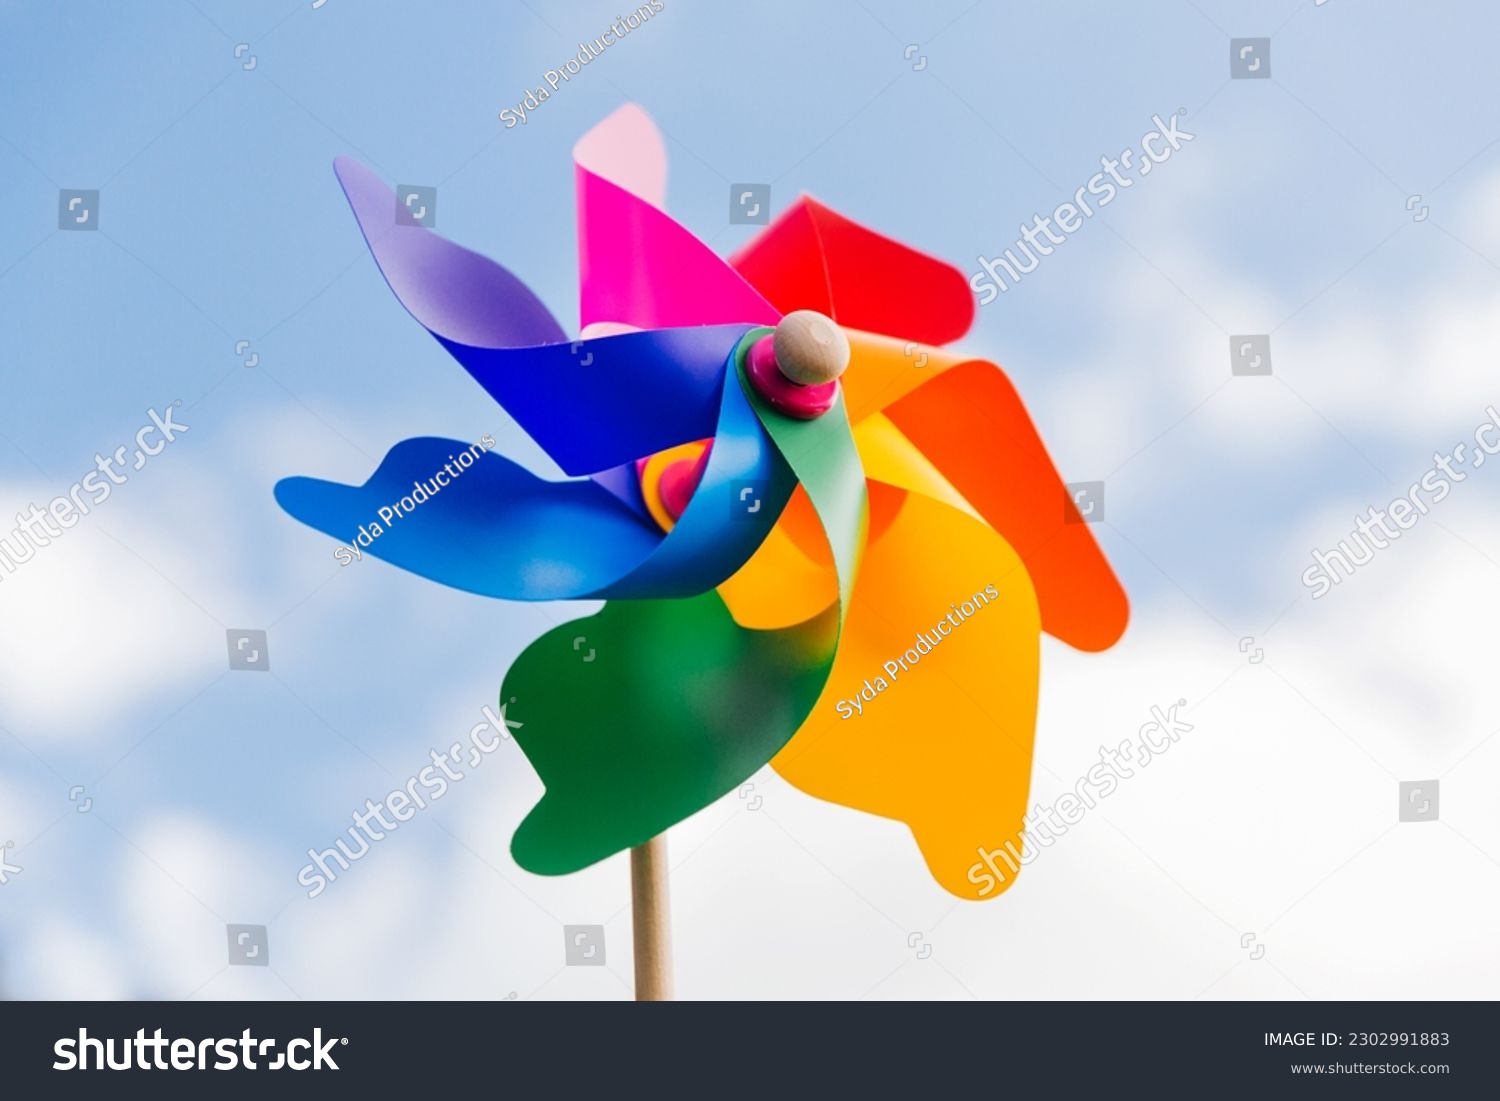 ecology, environment and sustainable energy concept - close up of multicolored pinwheel over blue sky #2302991883